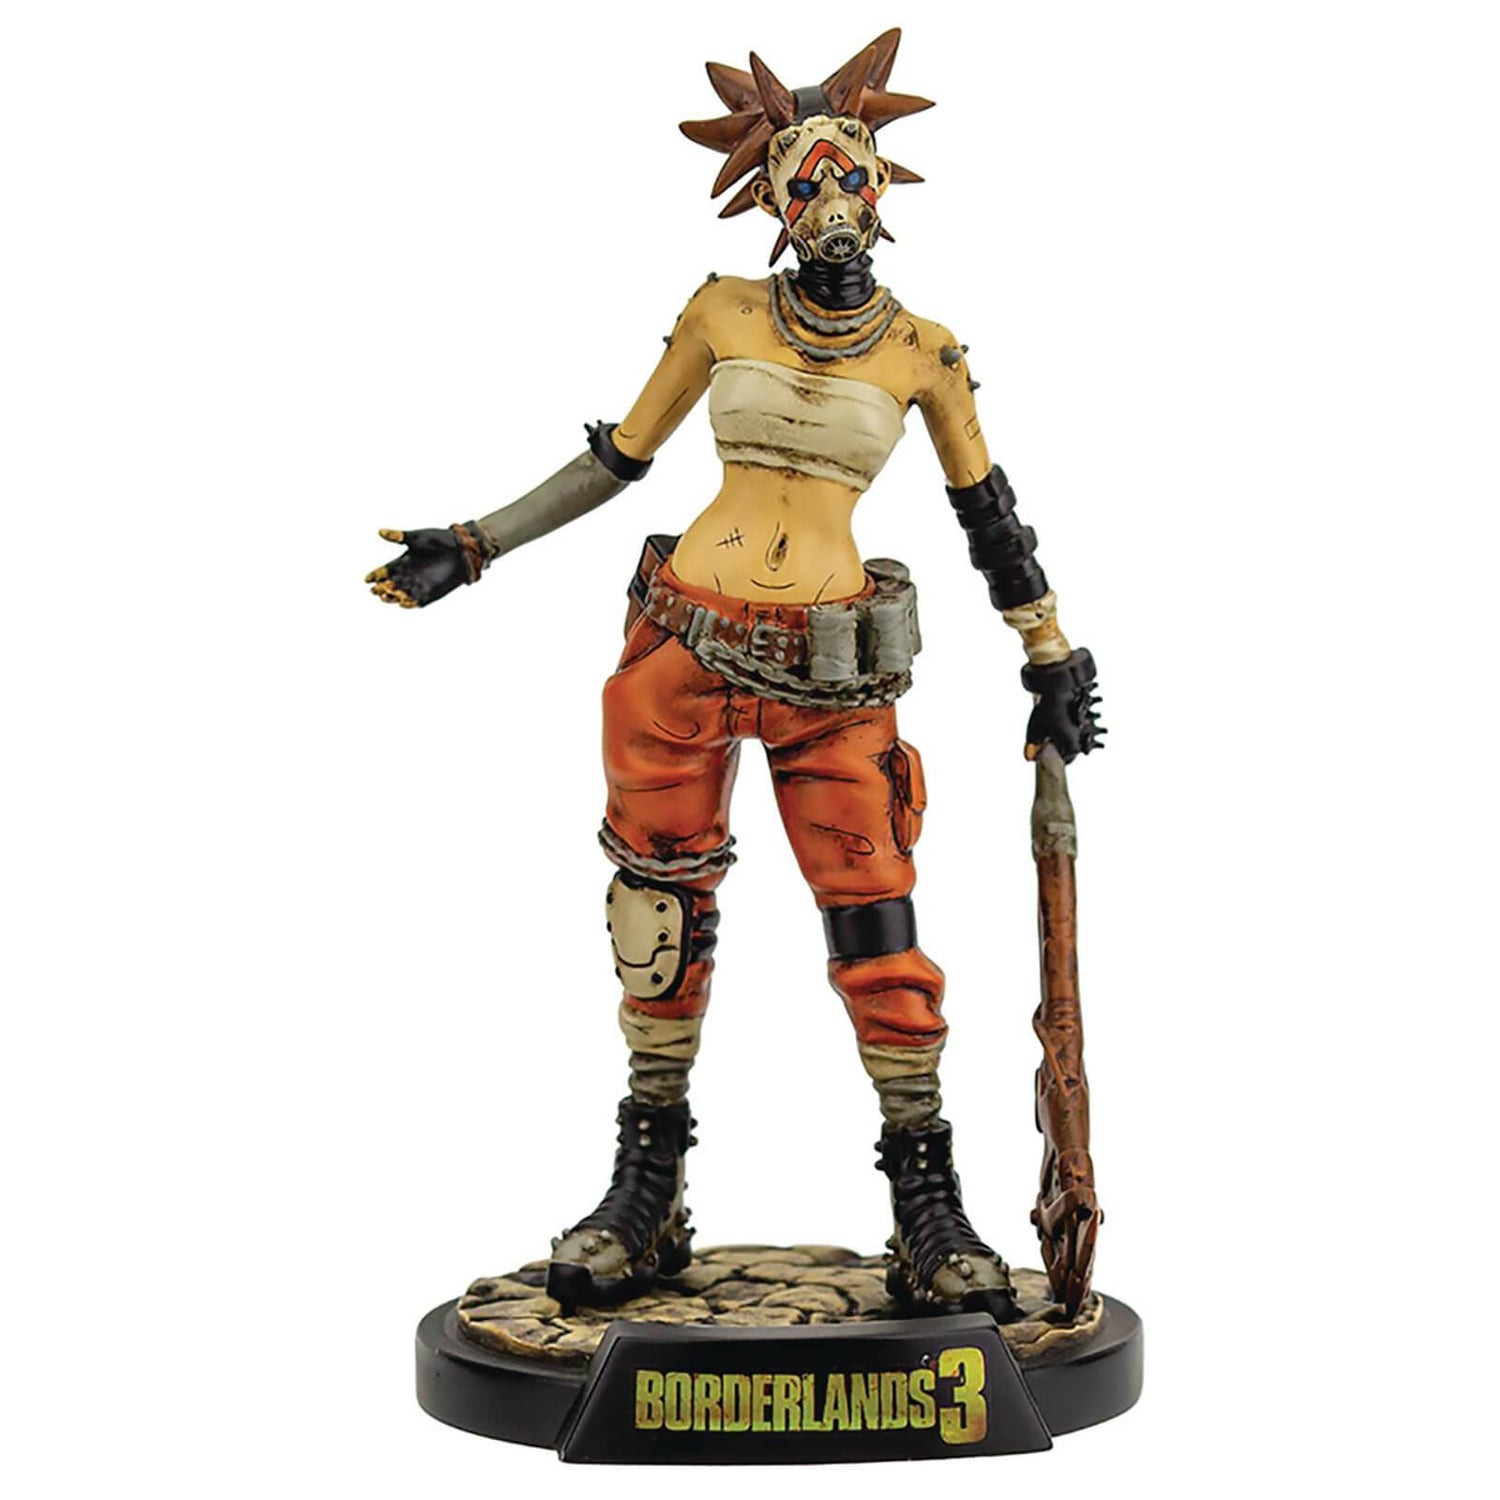 From Borderlands 3, the Female Psycho Bandit has been faithfully sculpted i...